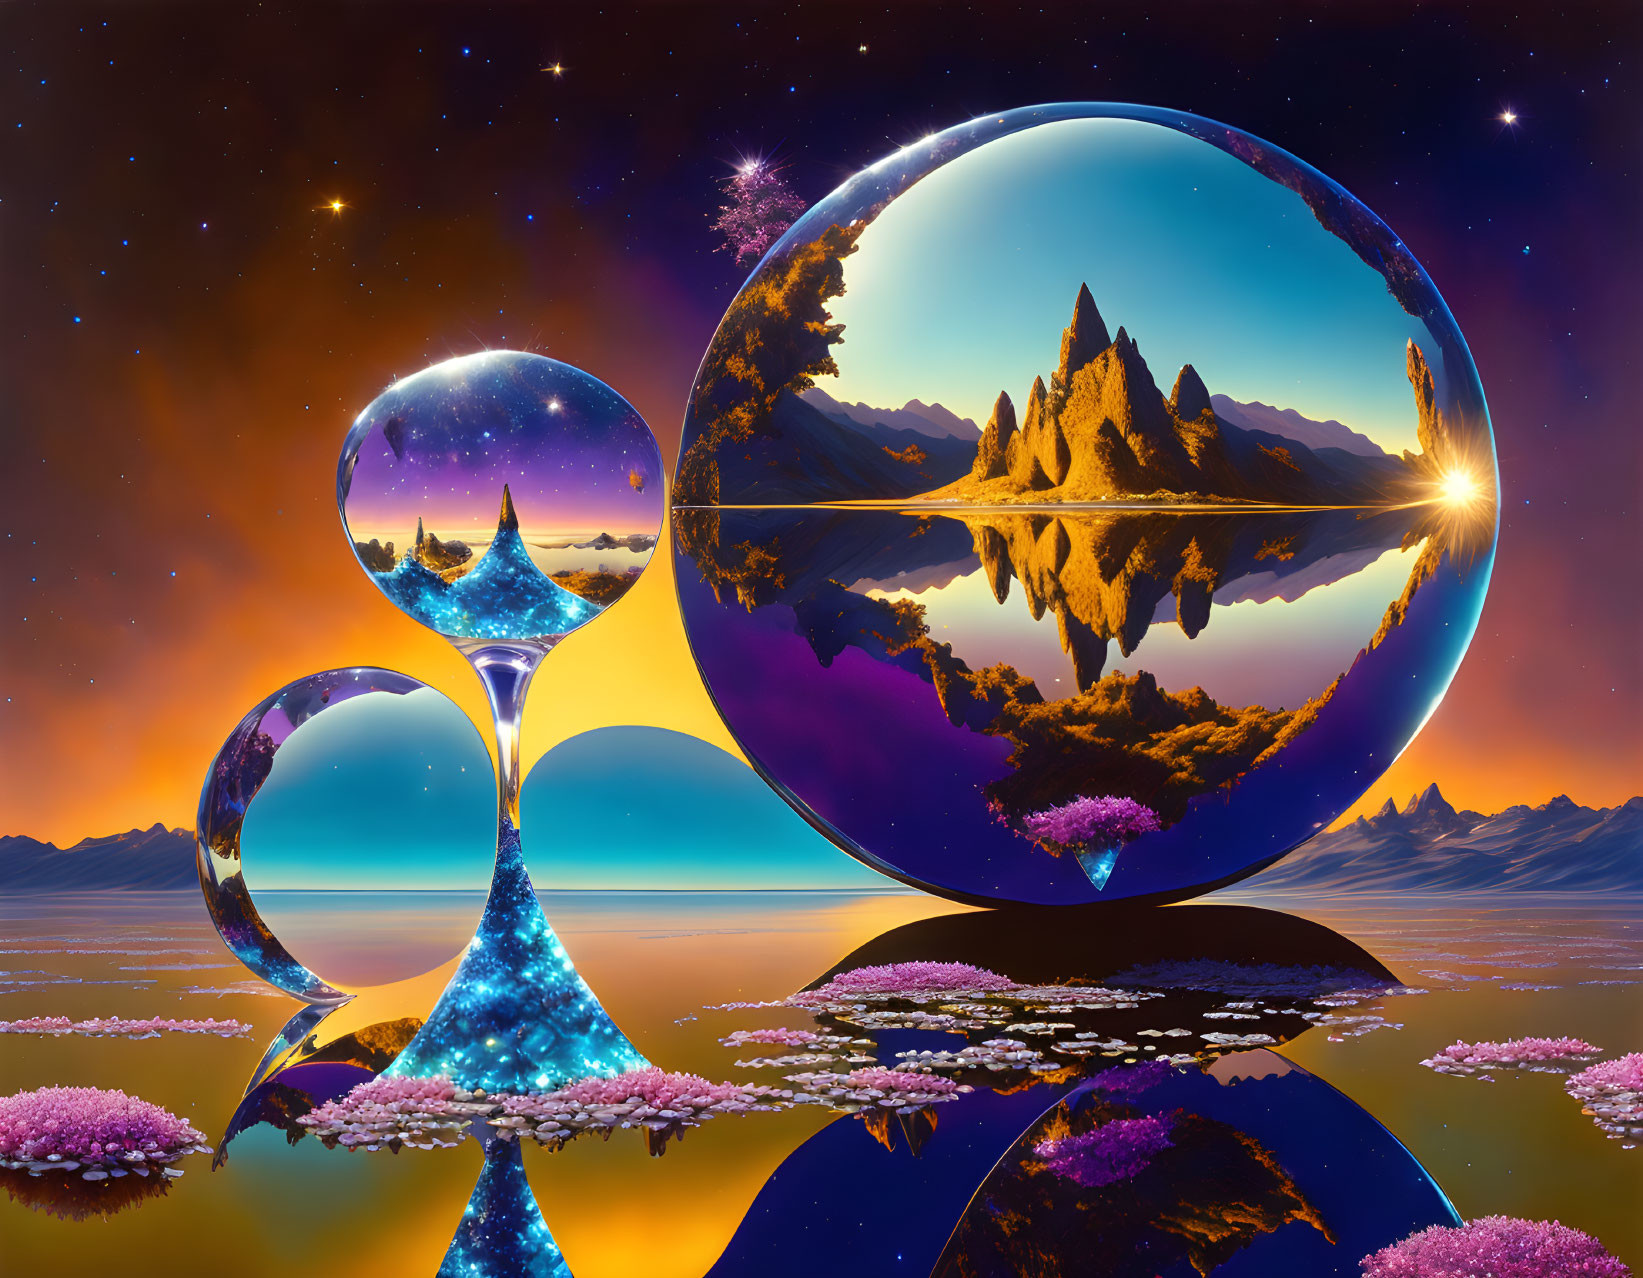 Surreal landscape with crystal spheres, mountains, starry sky, pink flowers, and sunset